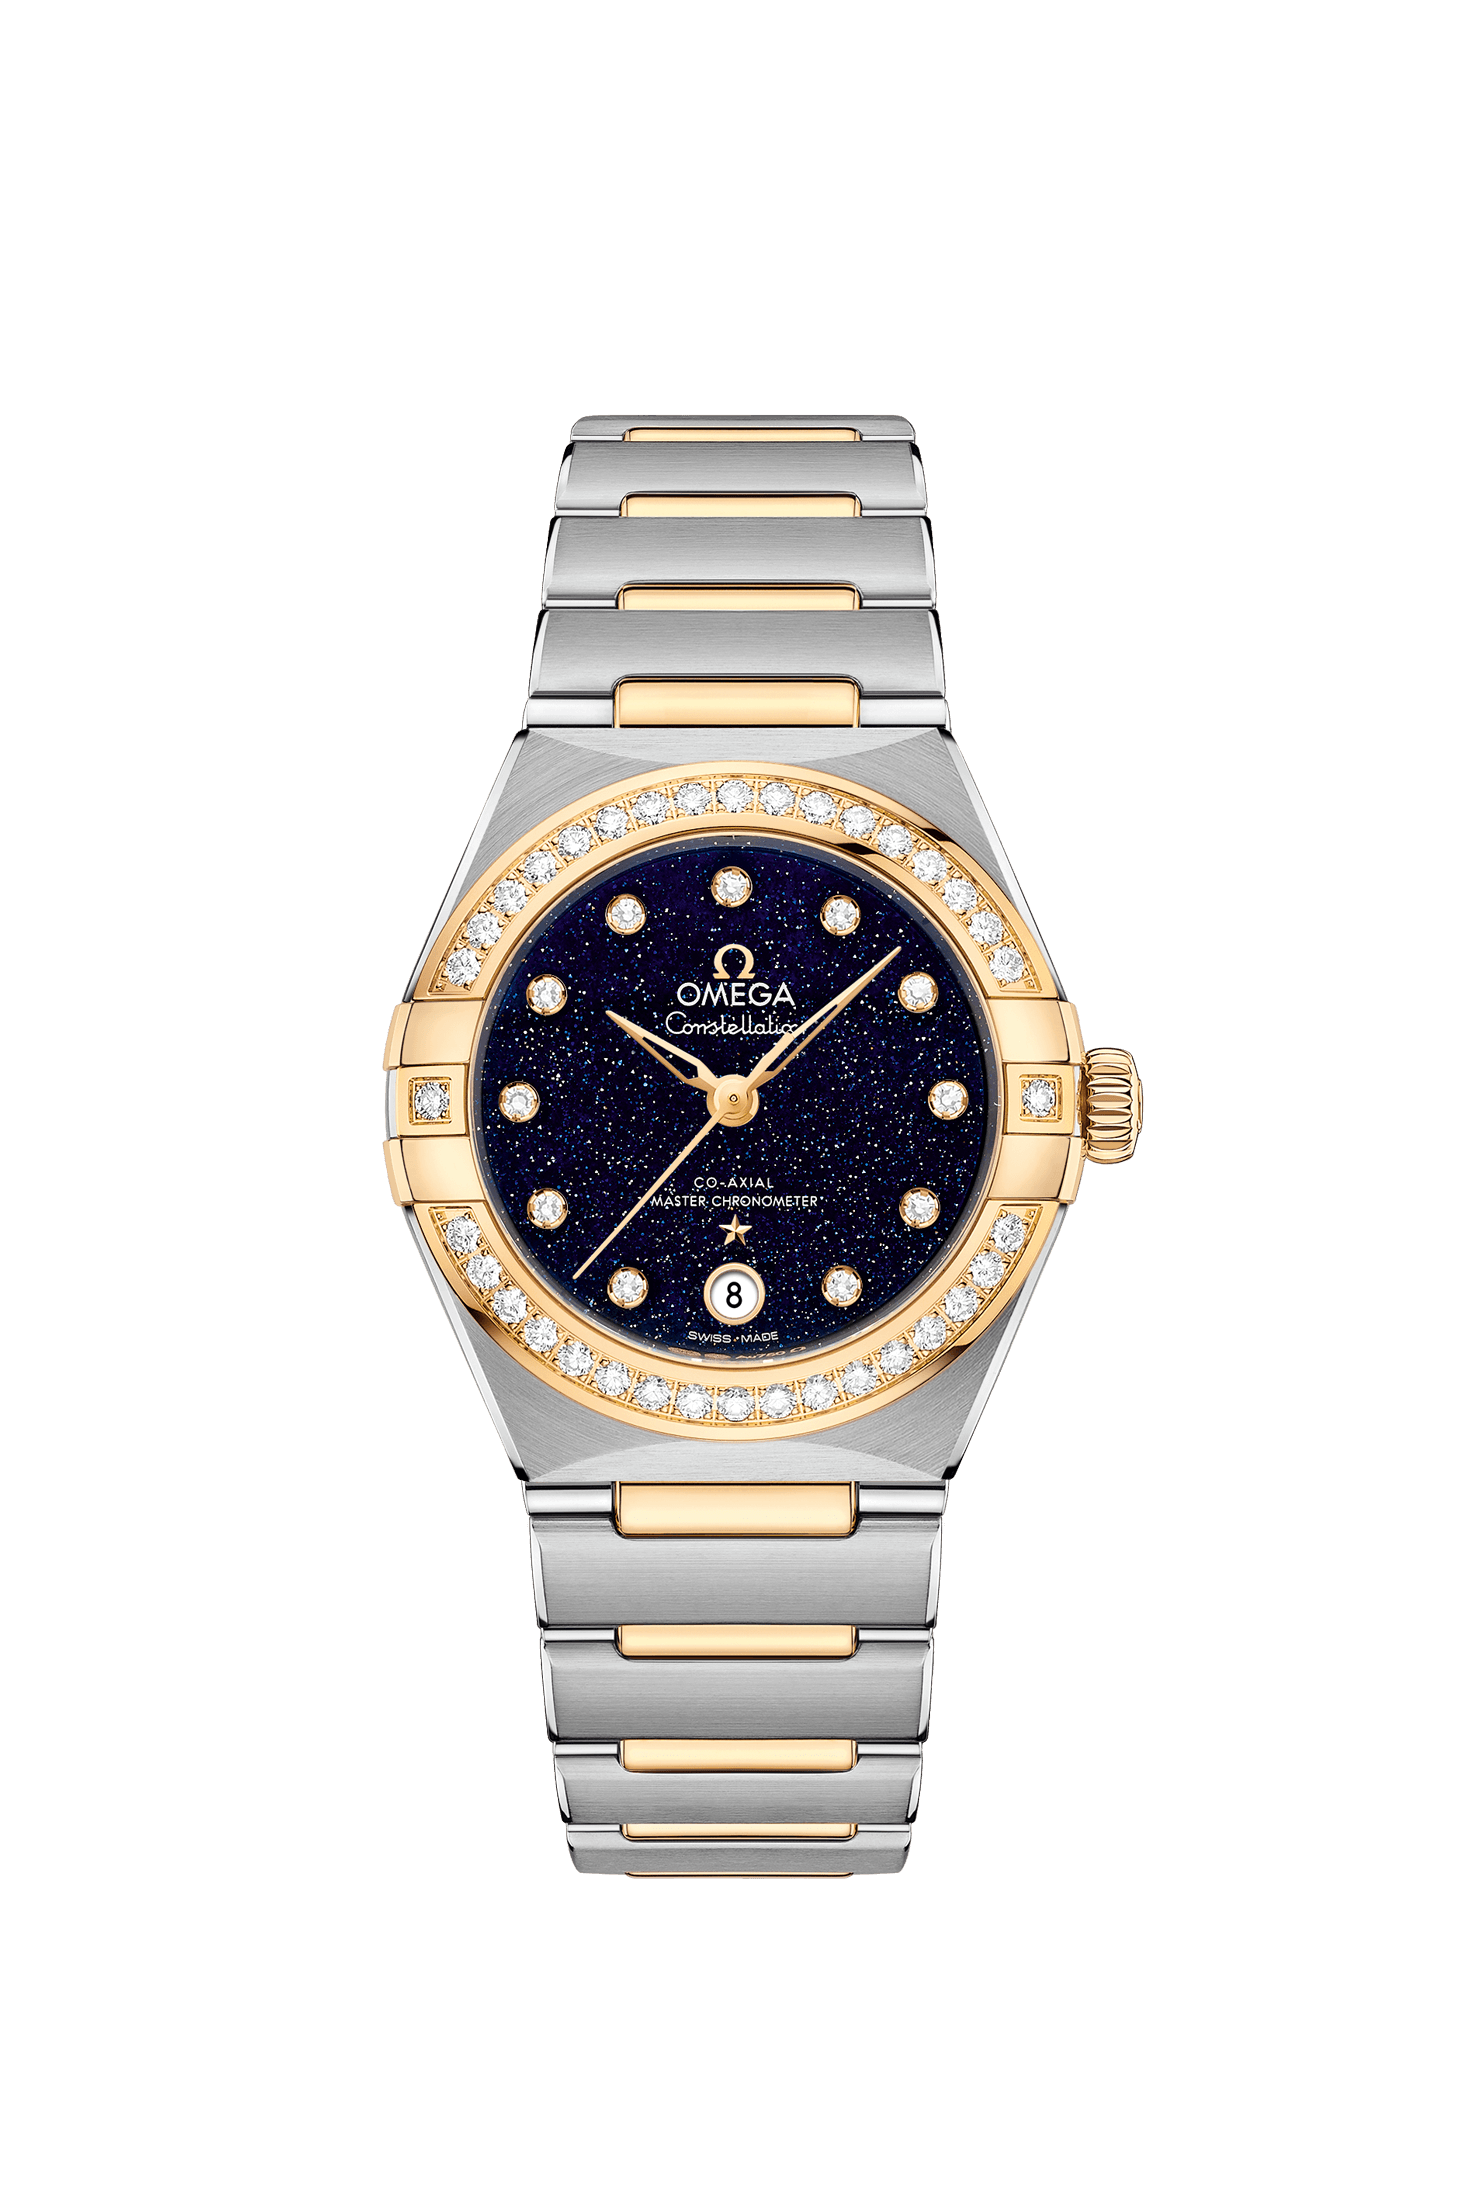 Ladies' watch  OMEGA, Constellation Co Axial Master Chronometer / 29mm, SKU: 131.25.29.20.53.001 | watchapproach.com